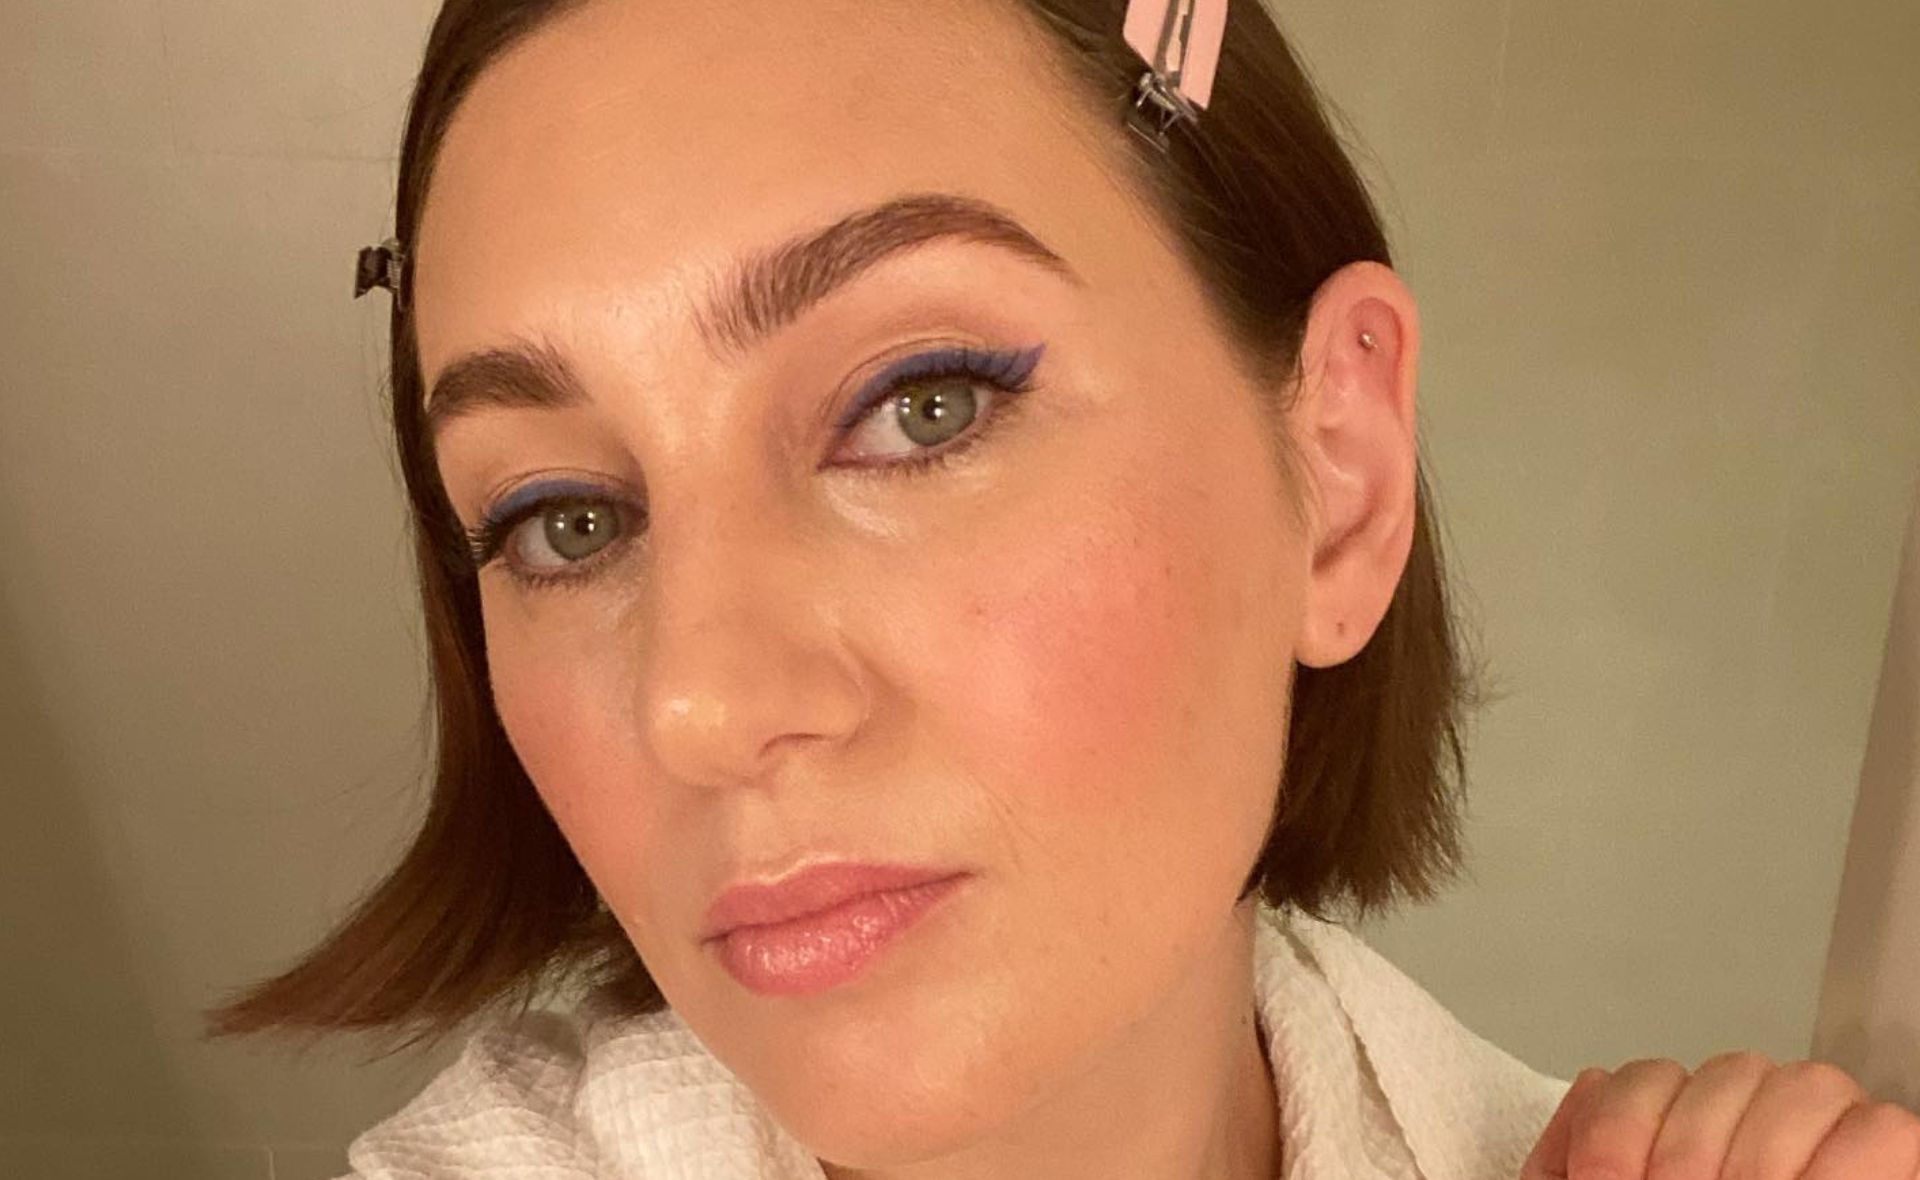 Zoë Foster Blake debuts an eye-catching beauty transformation before her luxe date night with Hamish